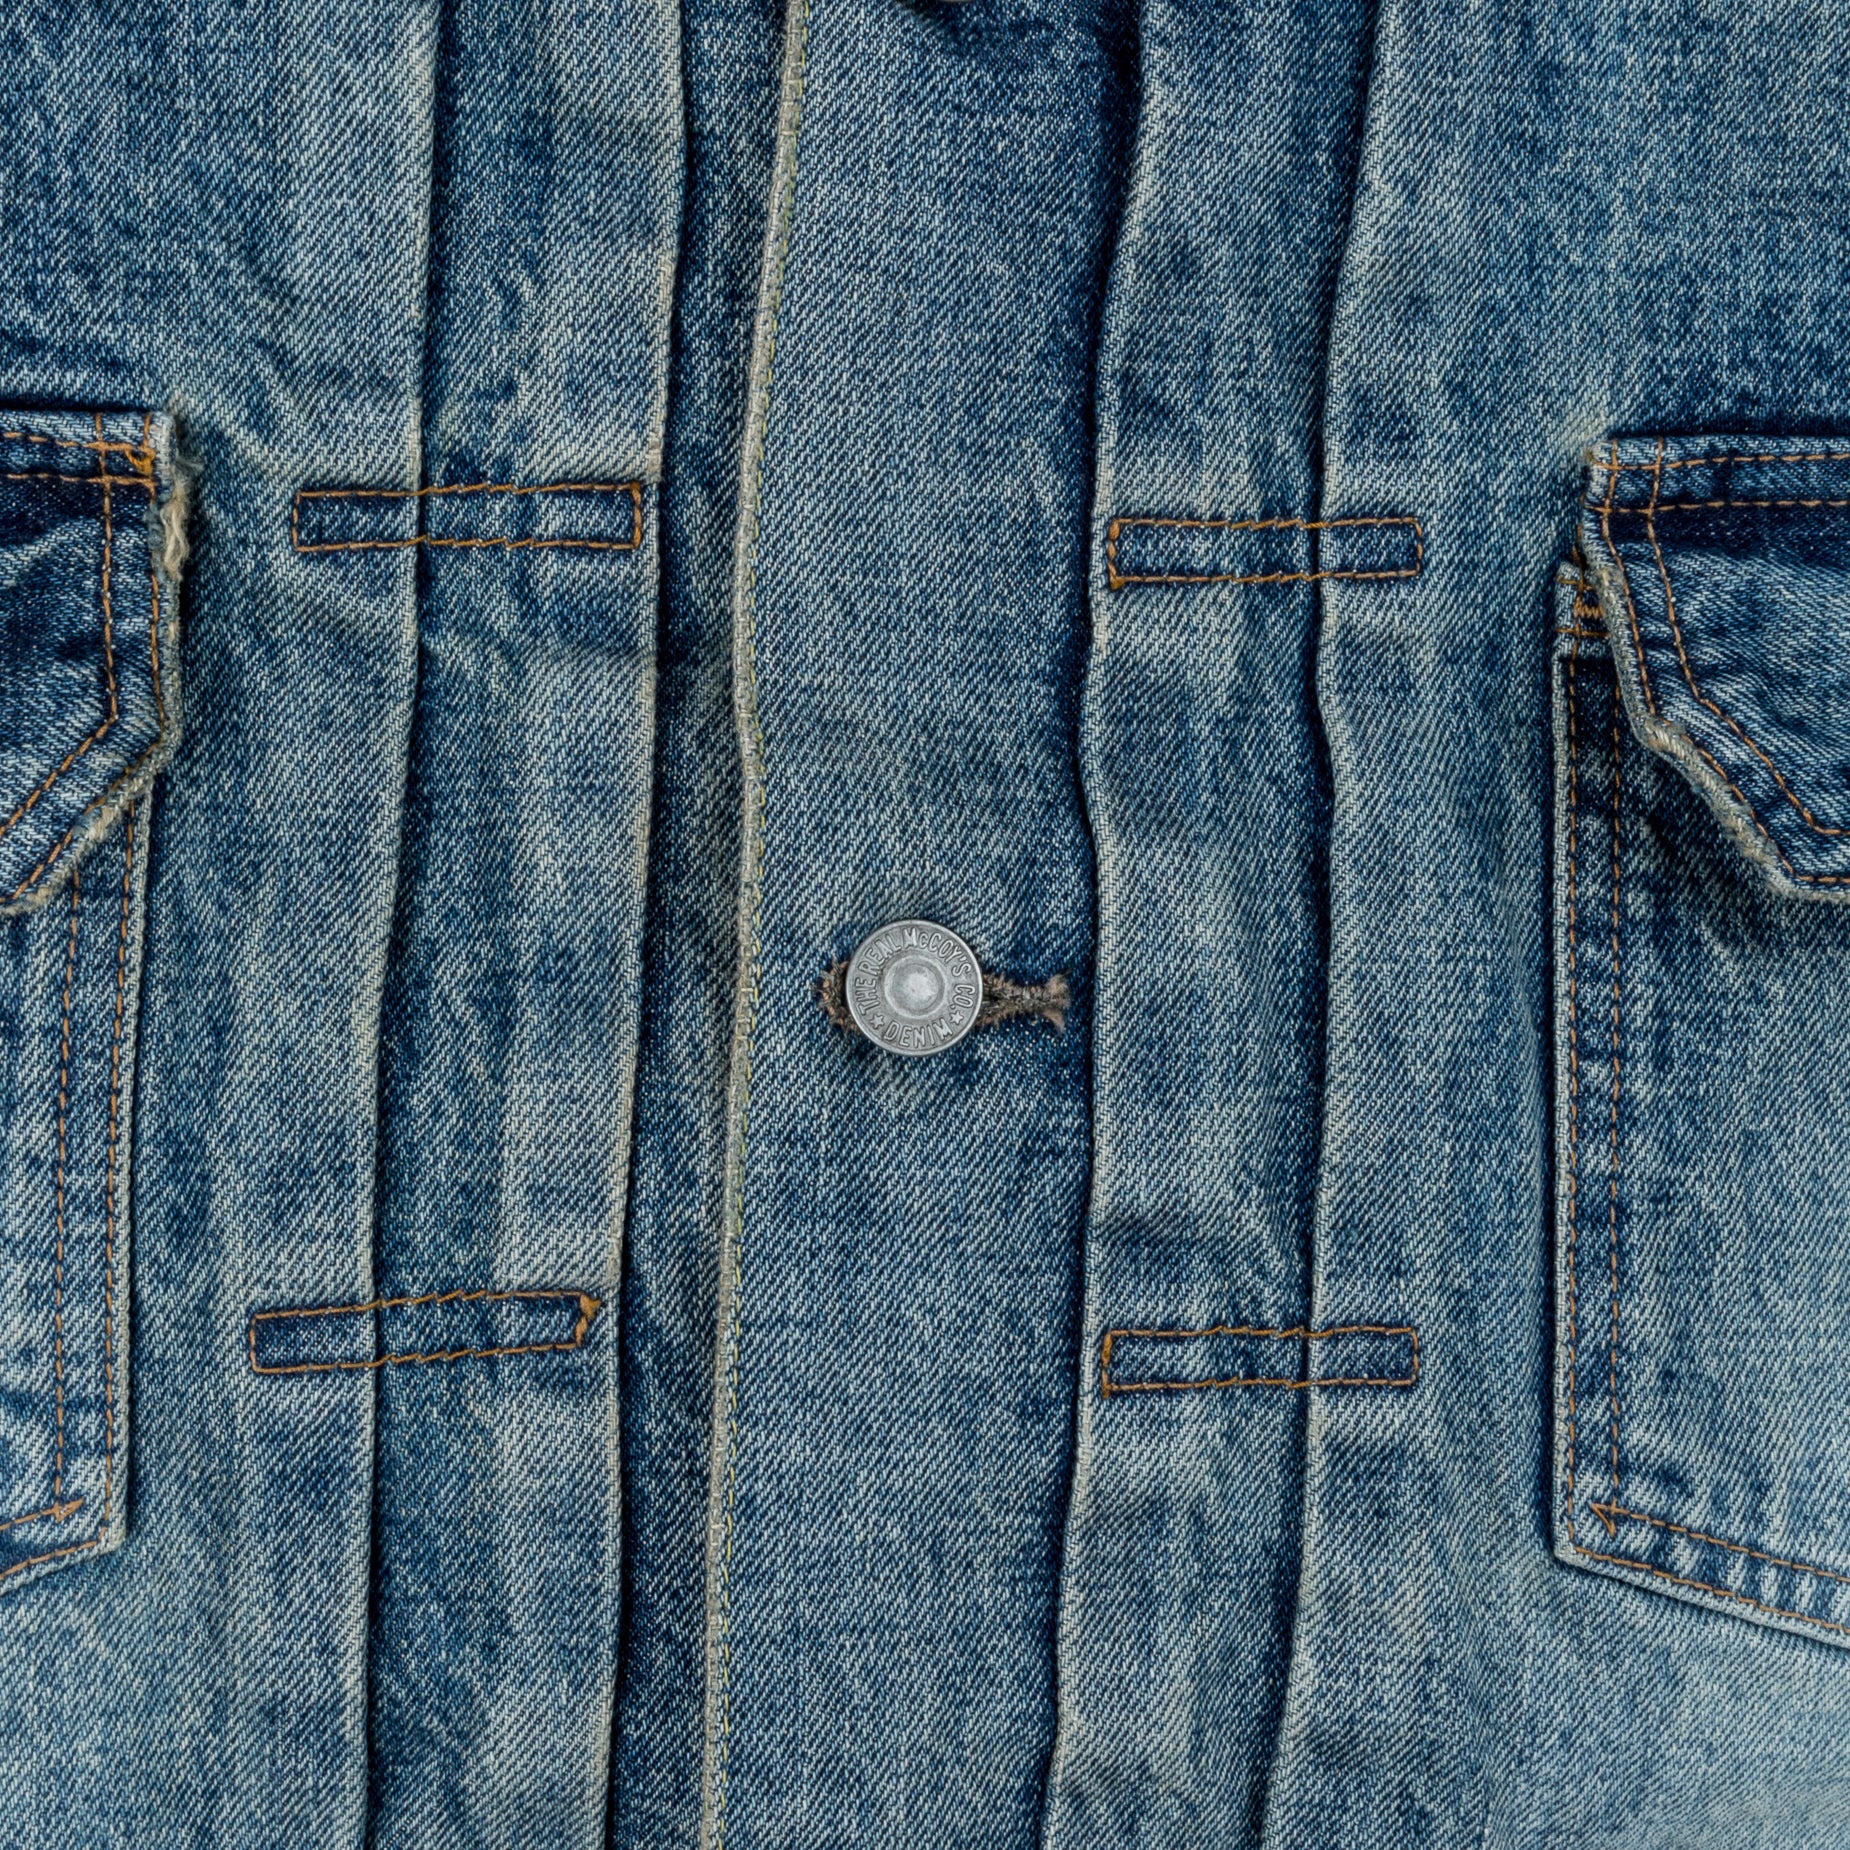 Levi's Denim Jackets for Men sale - discounted price | FASHIOLA INDIA